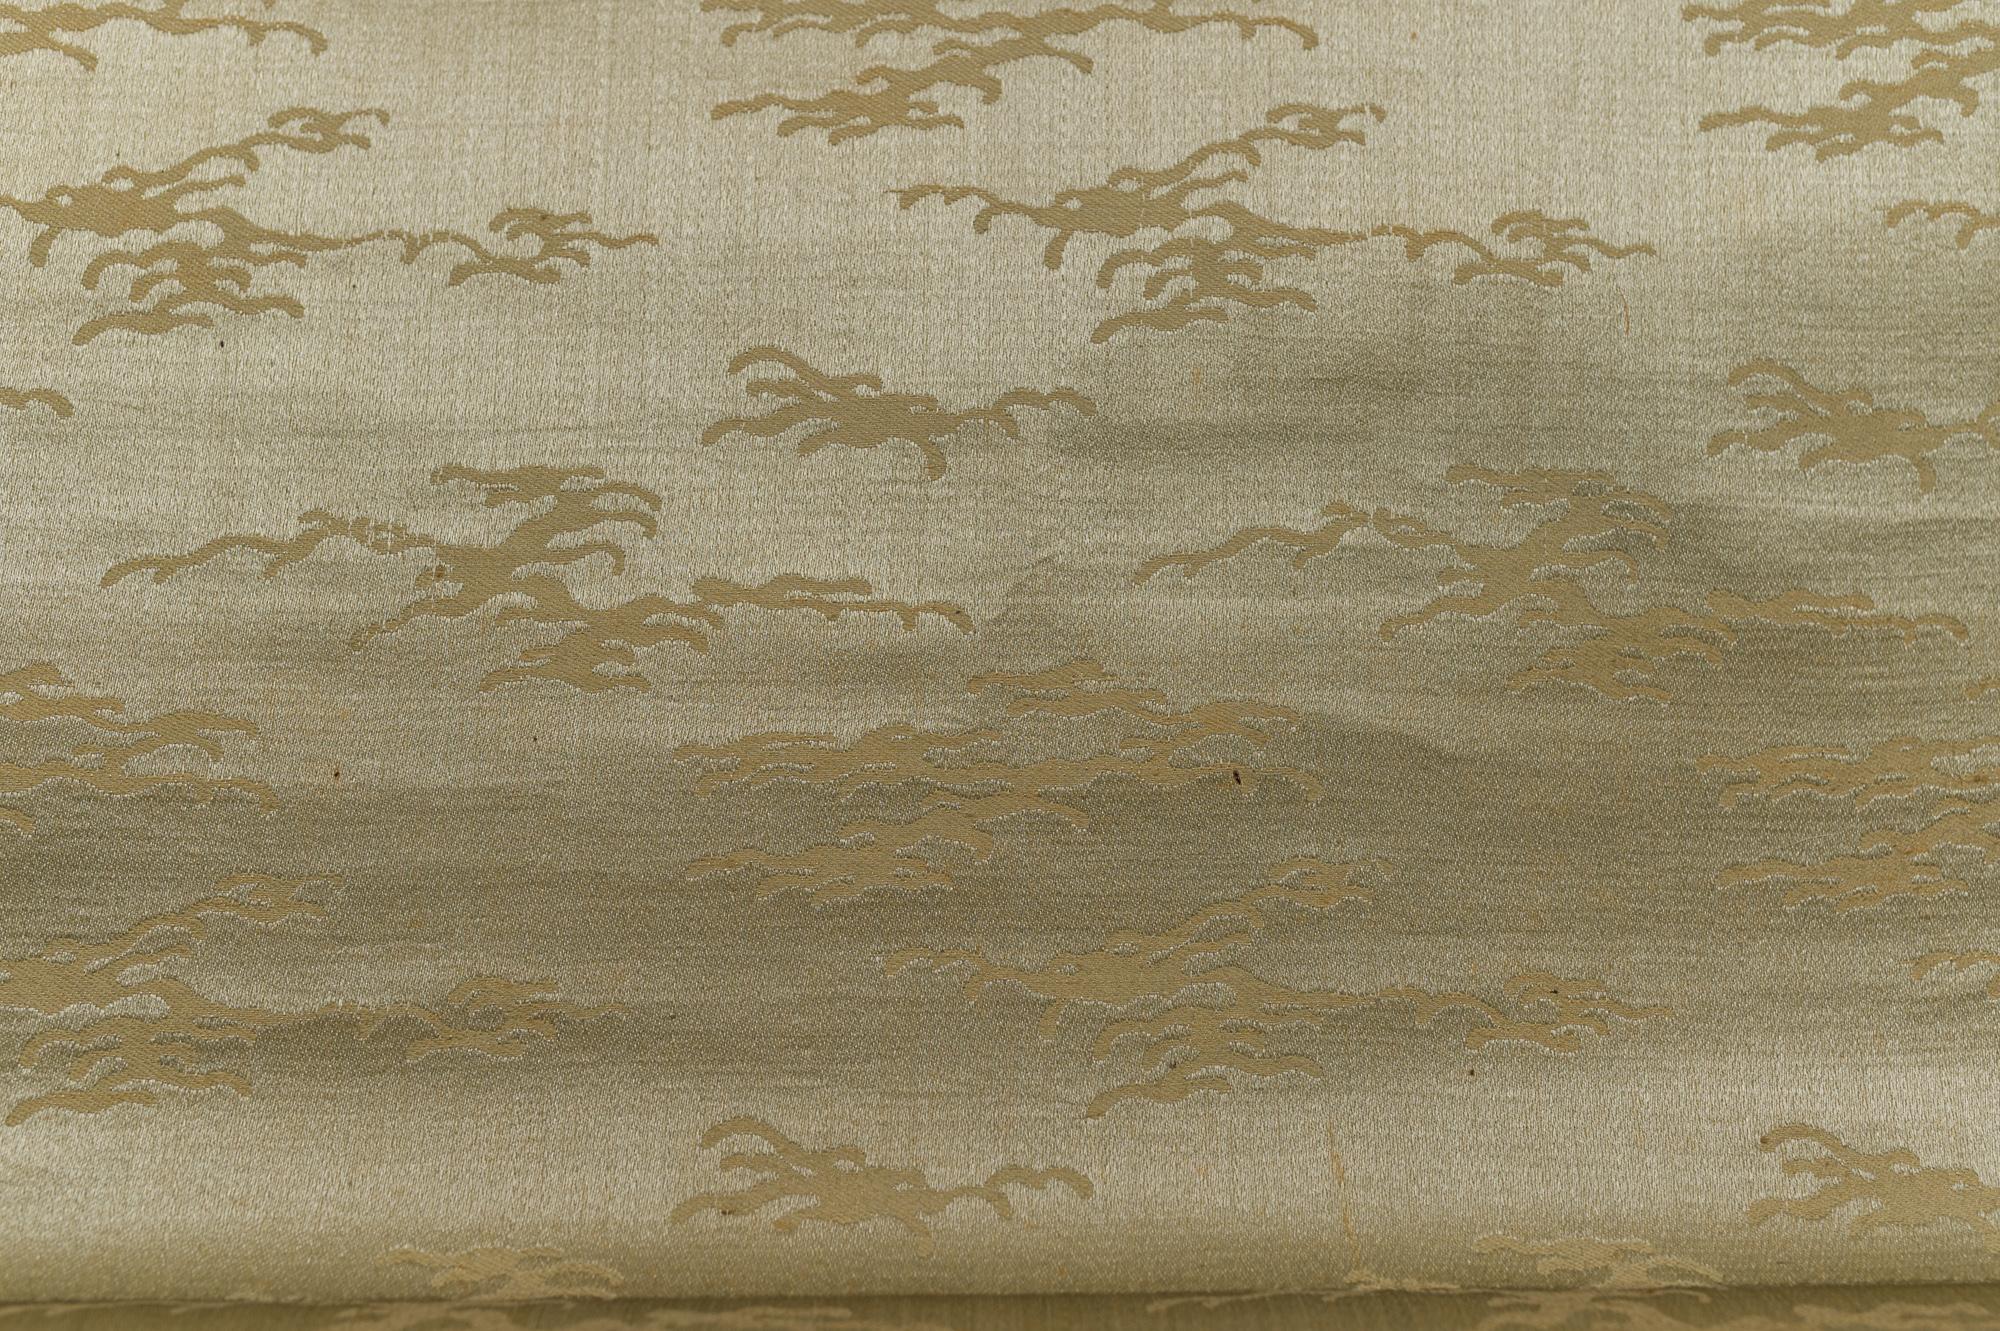 Taisho Period Scroll of Winter Trees 3